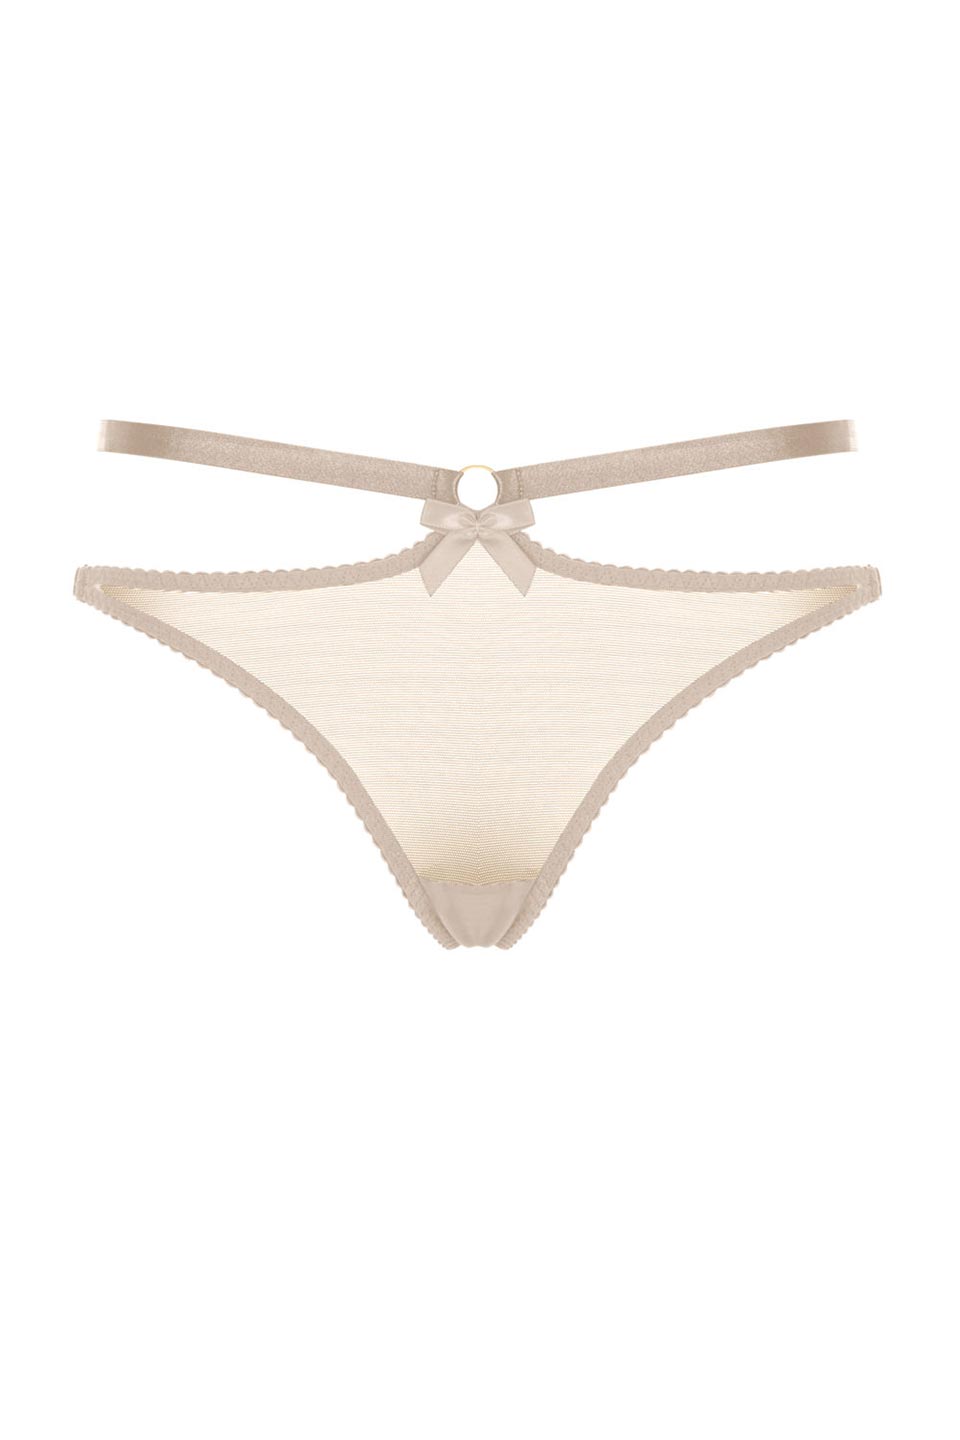 Atelier bordelle harness thong caramel front. Product gallery 1